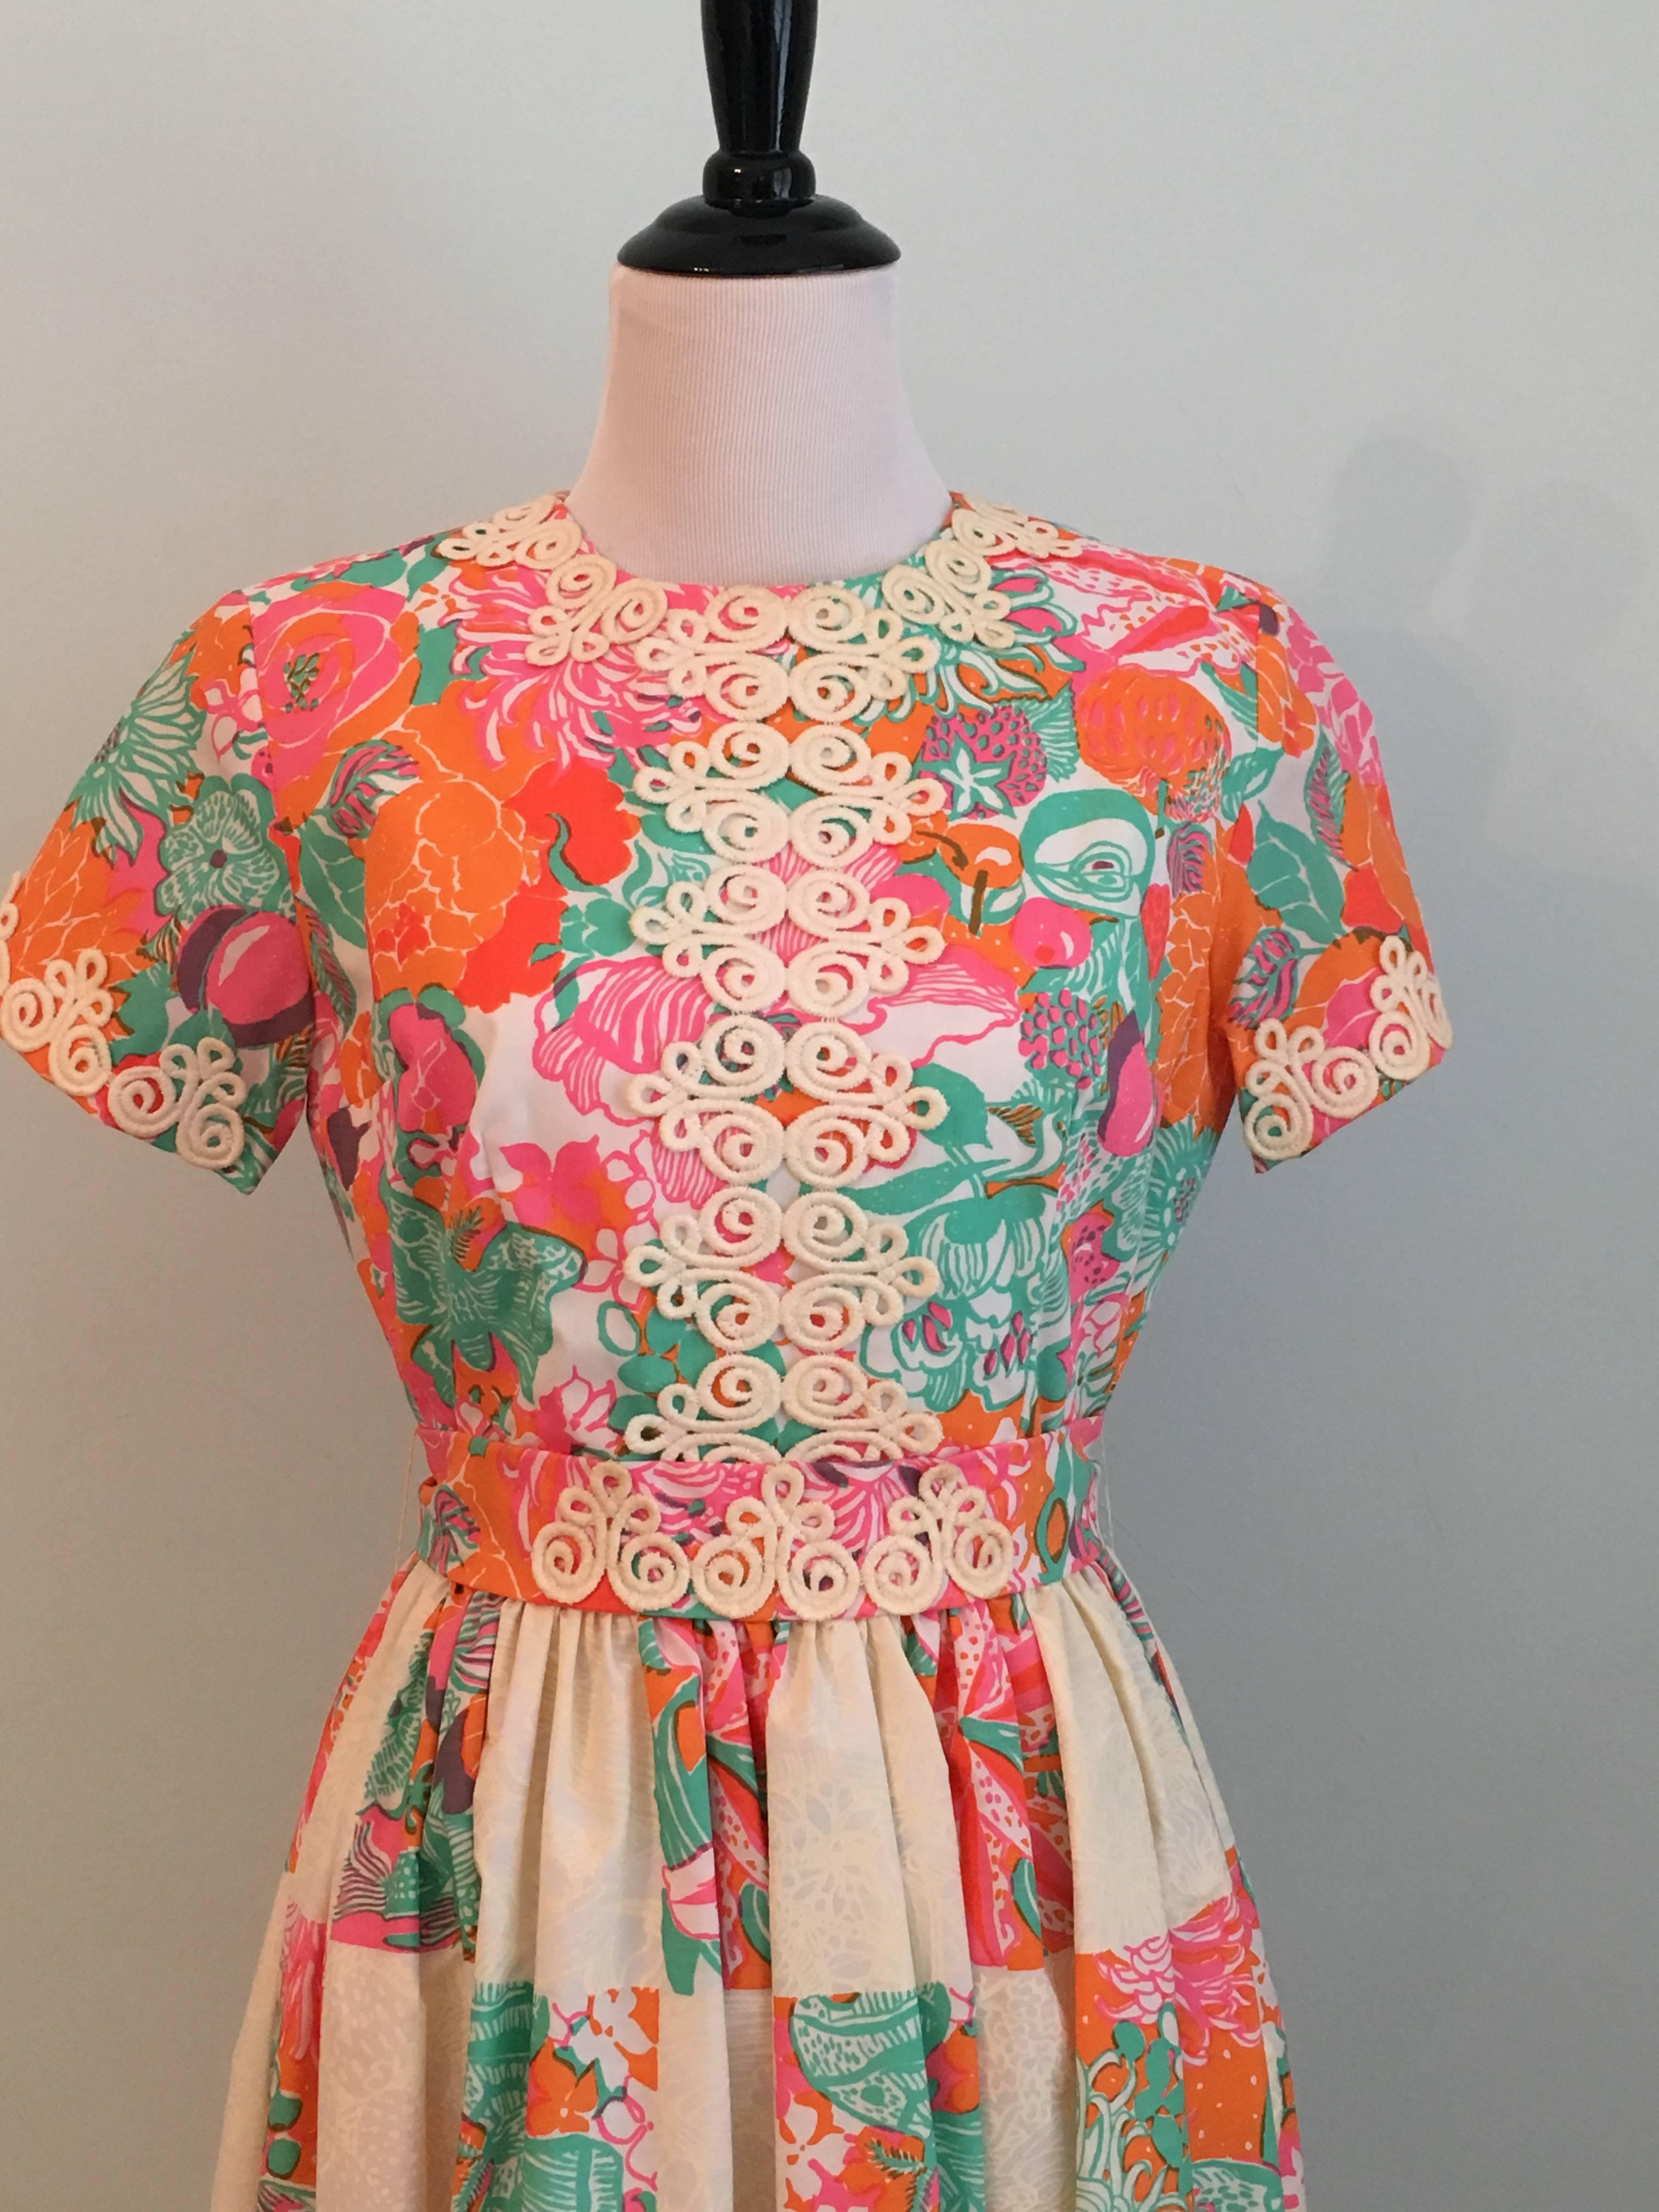 Lilly Pulitzer Maxi Dress with Patchwork Print Skirt, 1960s In Excellent Condition For Sale In Chicago, IL